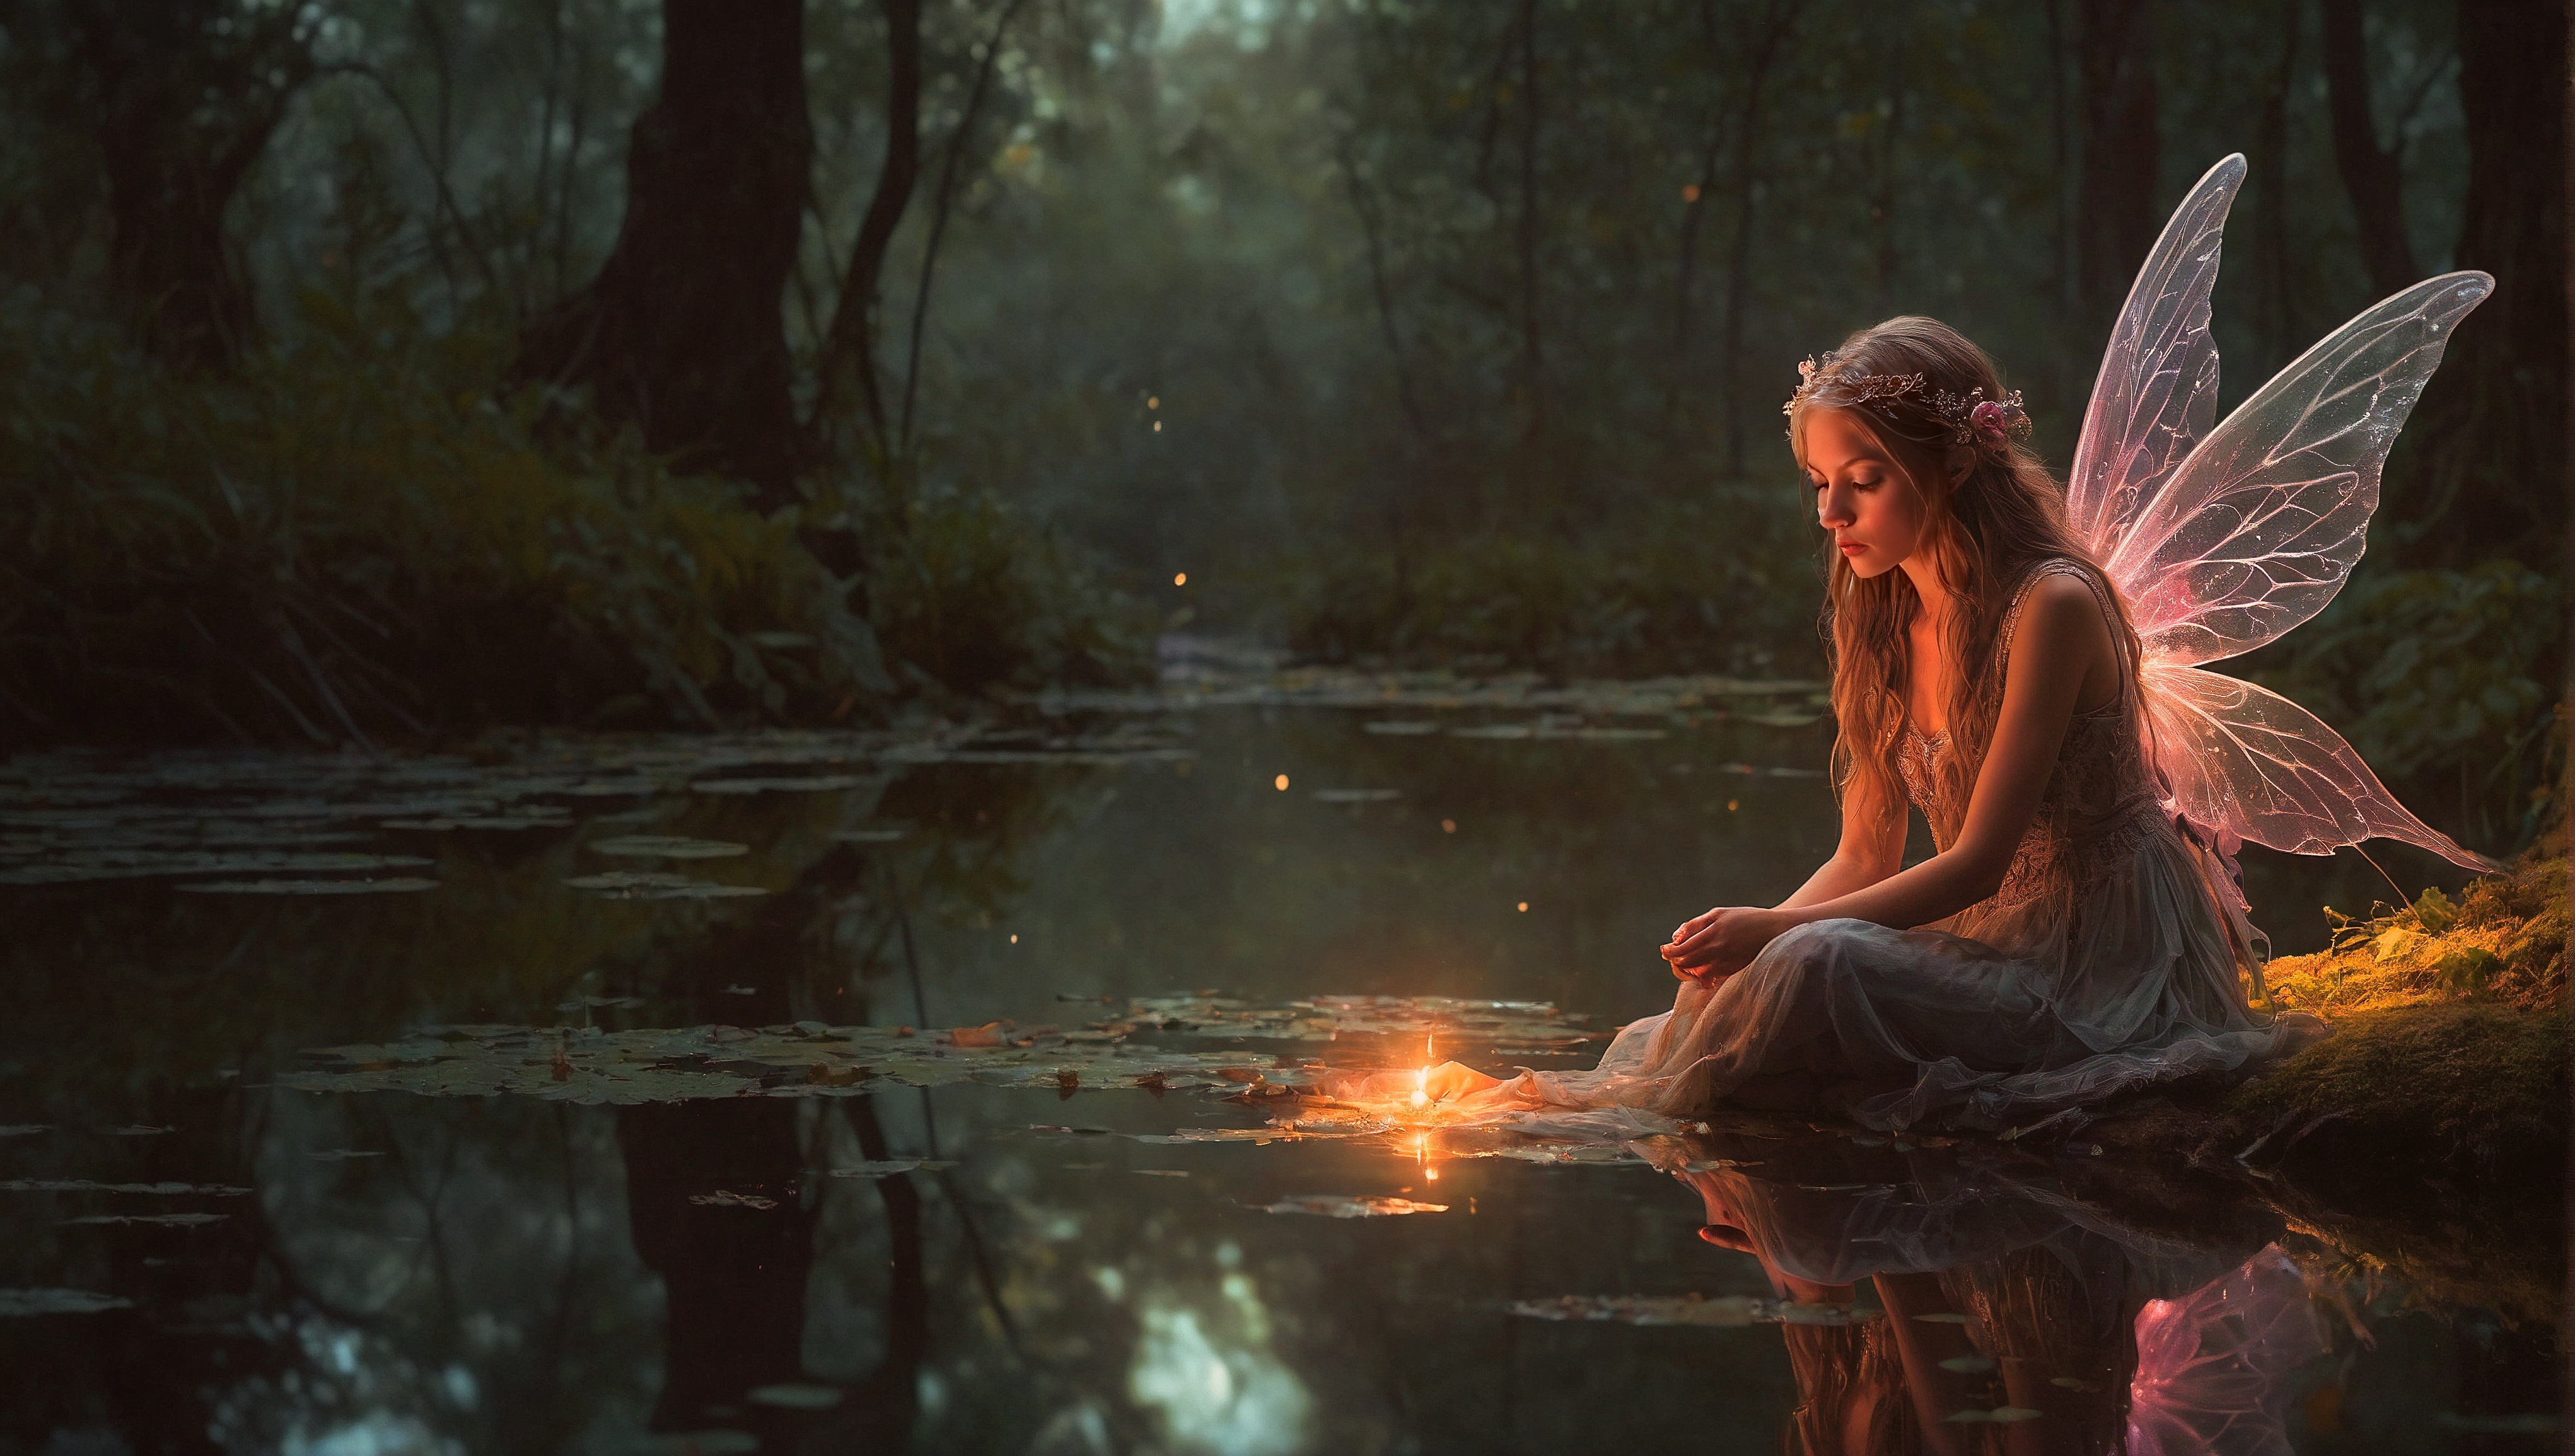 A fairy sits on the shore of a pond next to a small candle